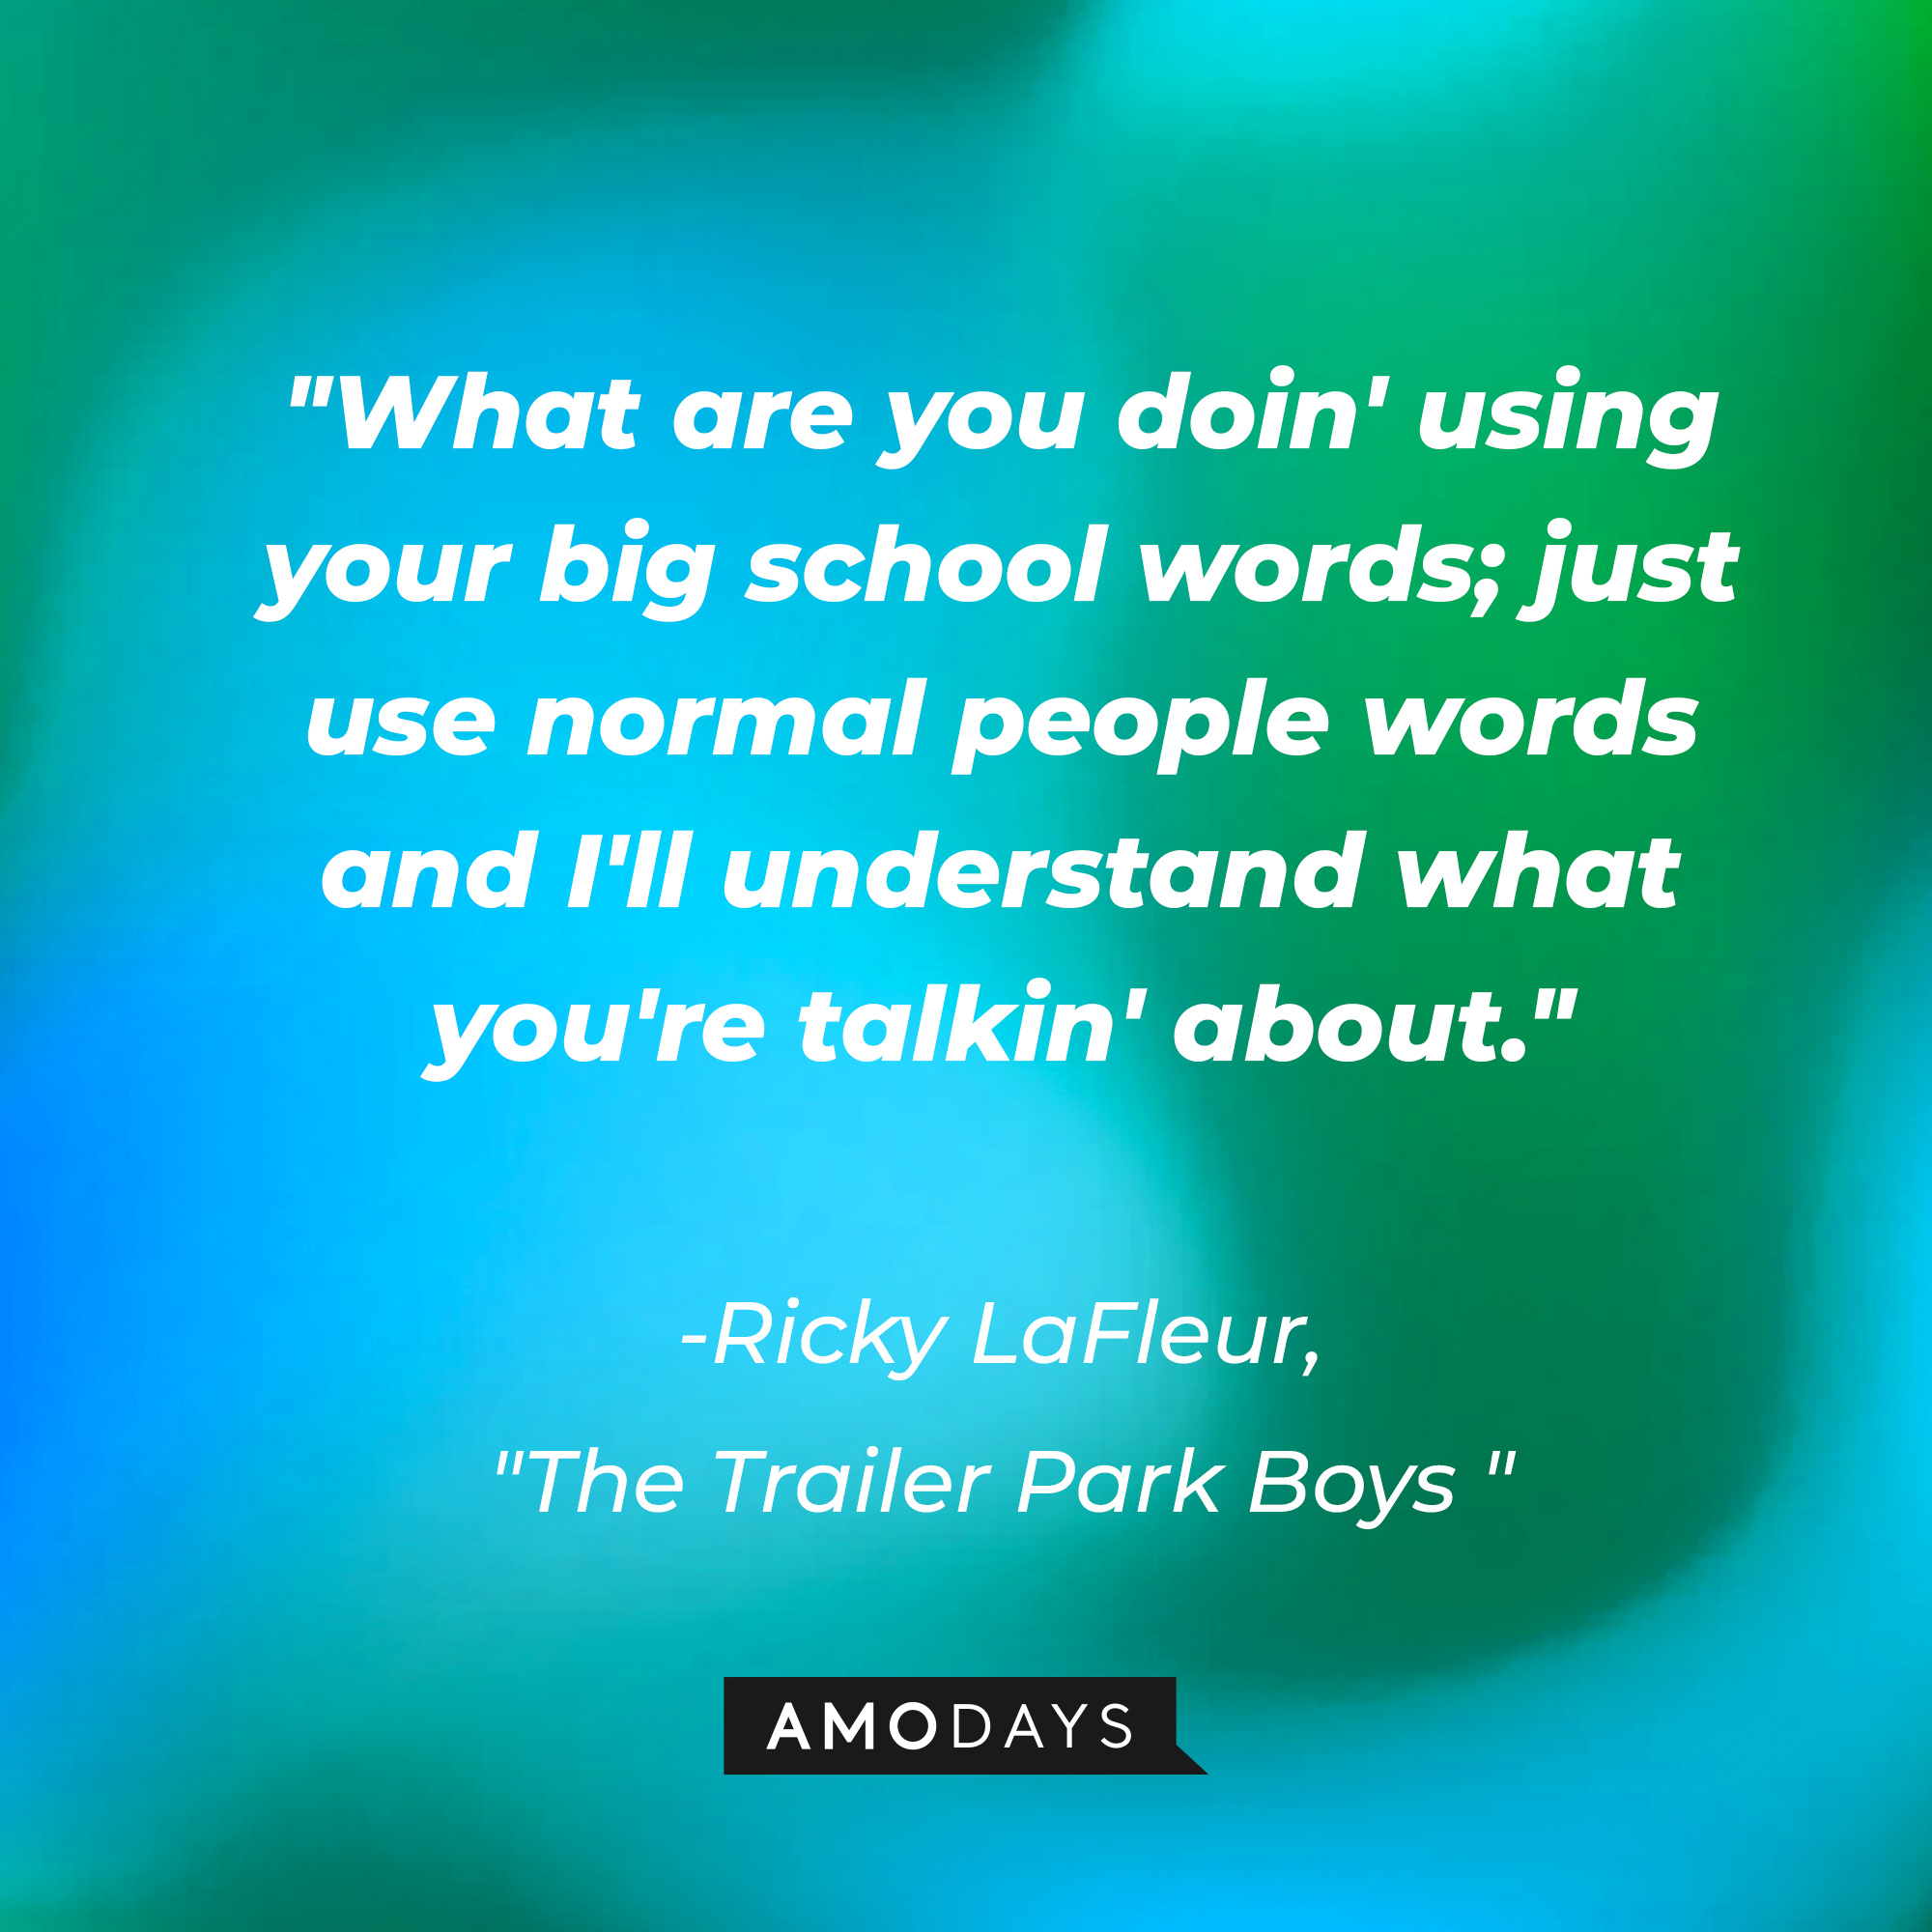 Ricky LaFleur with his quote: "What are you doin' using your big school words; just use normal people words and I'll understand what you're talkin' about." | Source: AmoDays